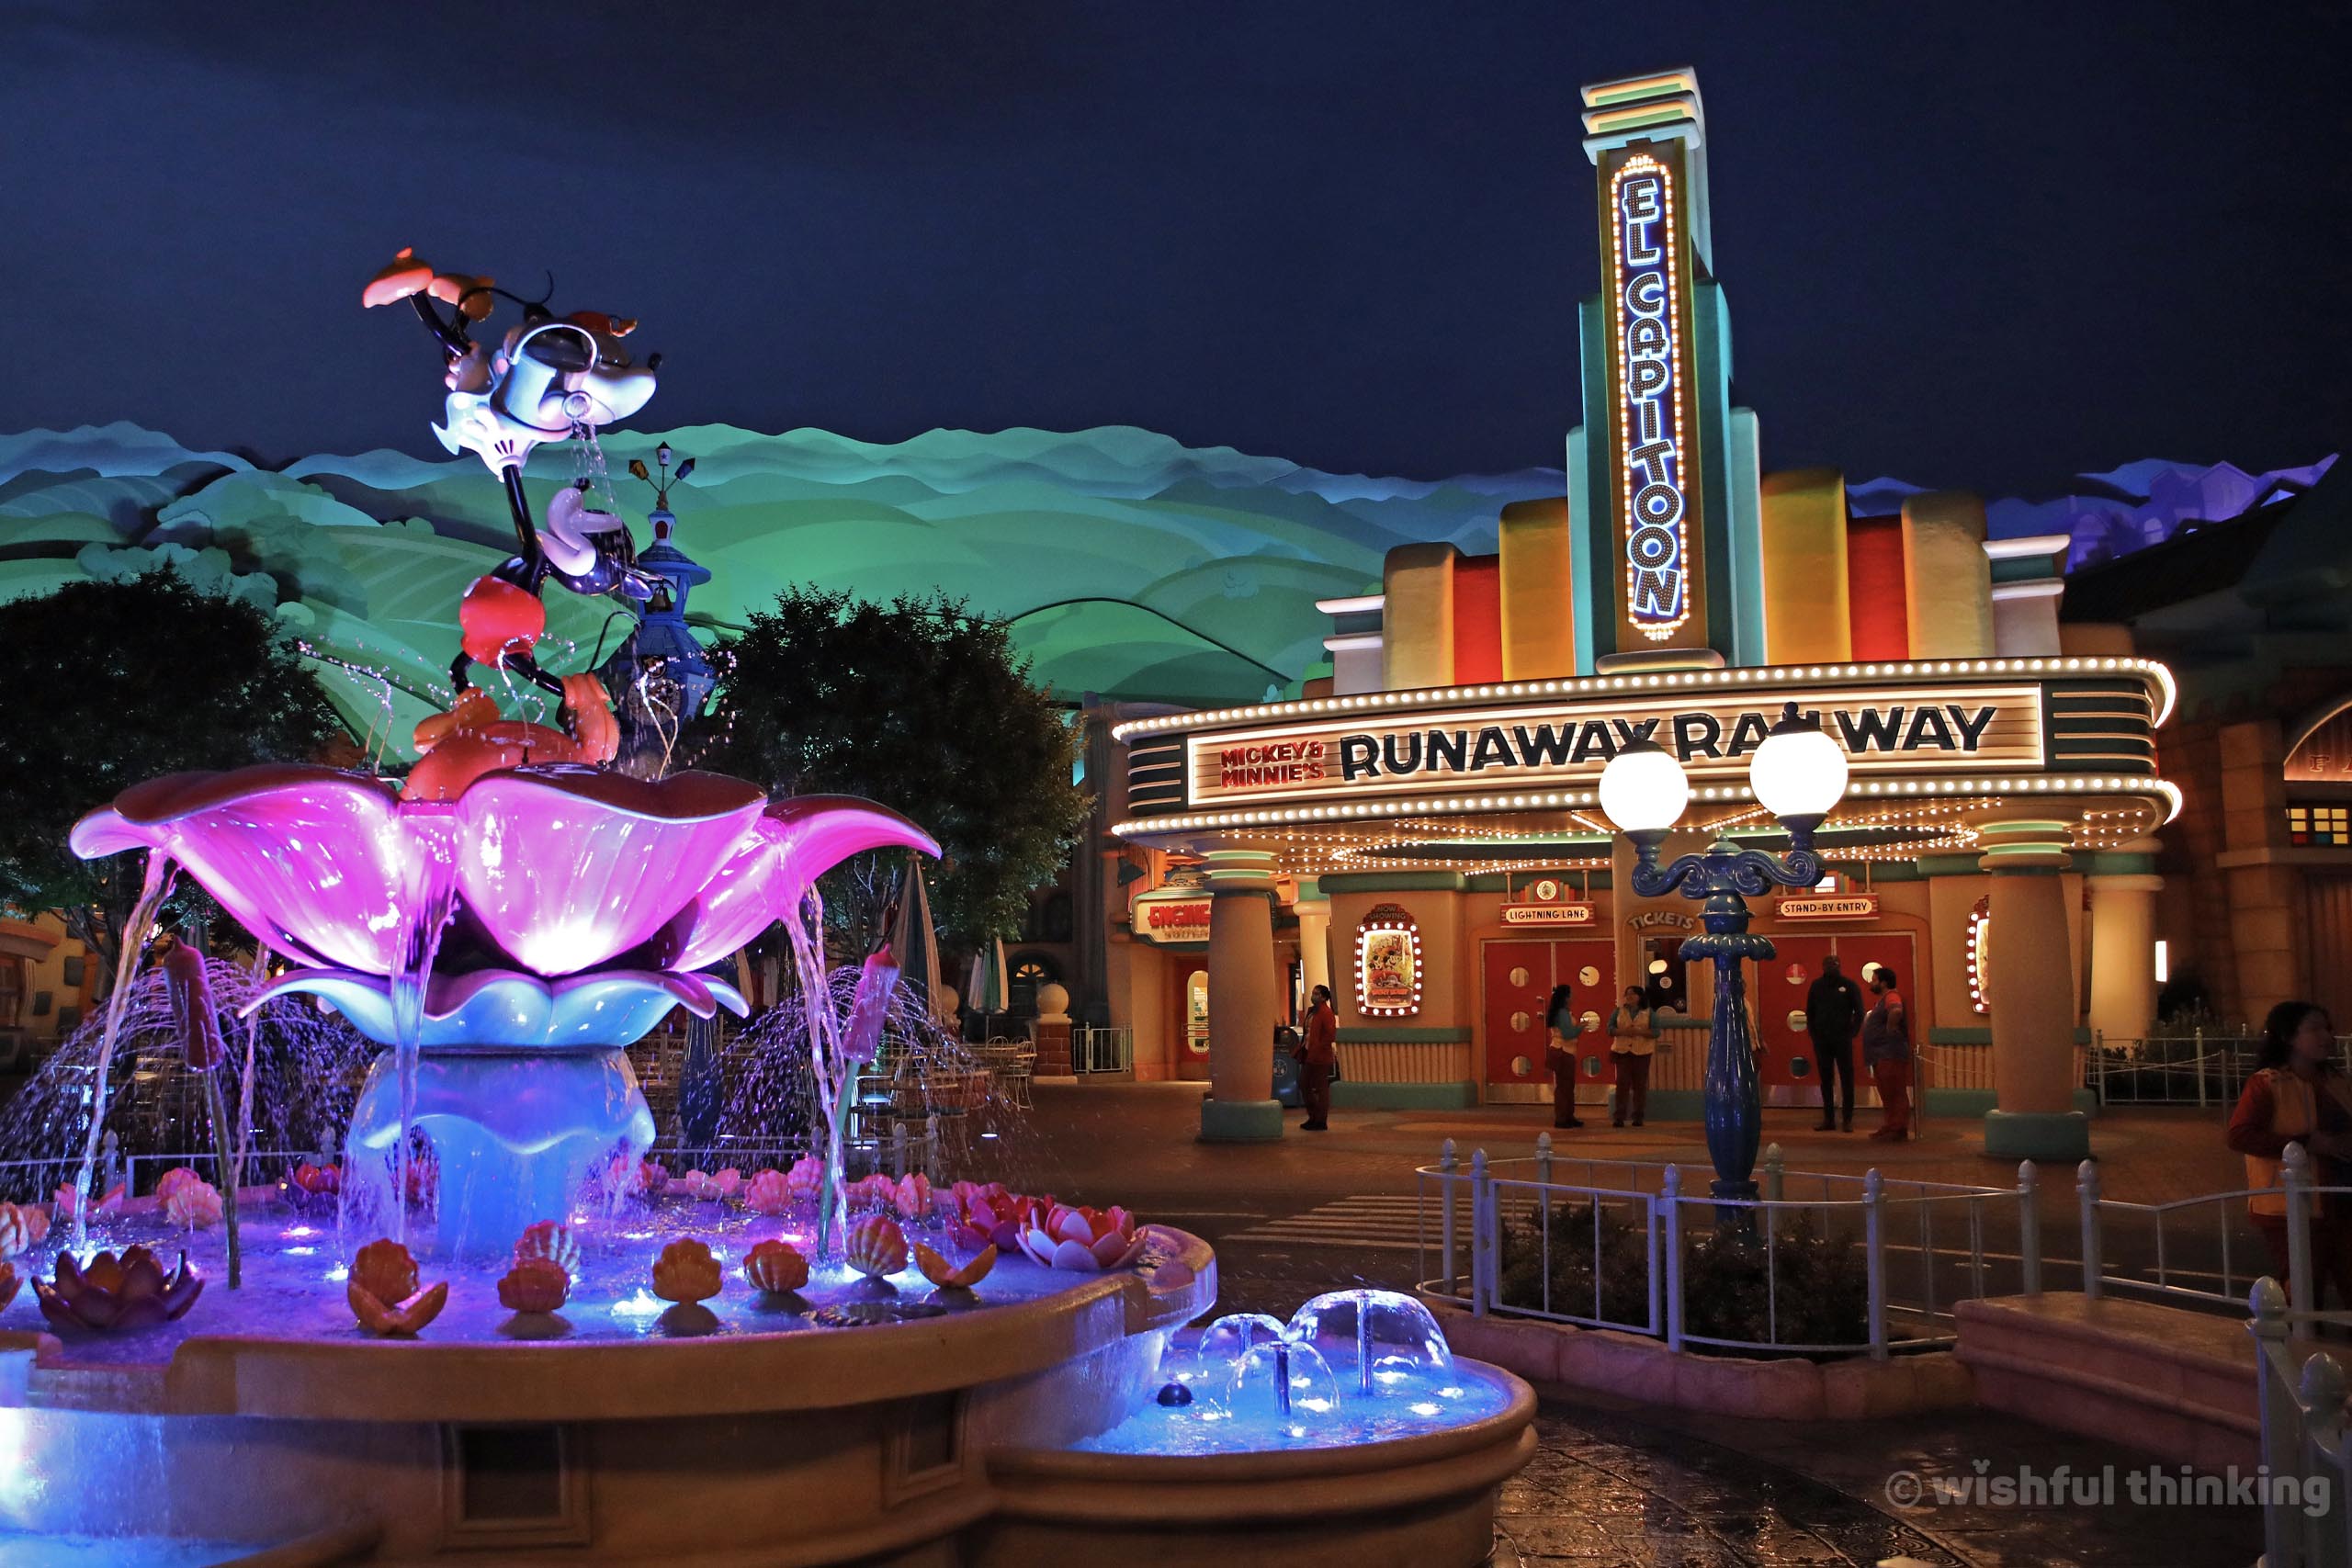 Mickey & Minnie's Runaway Railway at Disneyland's Toontown glows with an inviting marquee and a whimsical Mickey & Minnie fountain